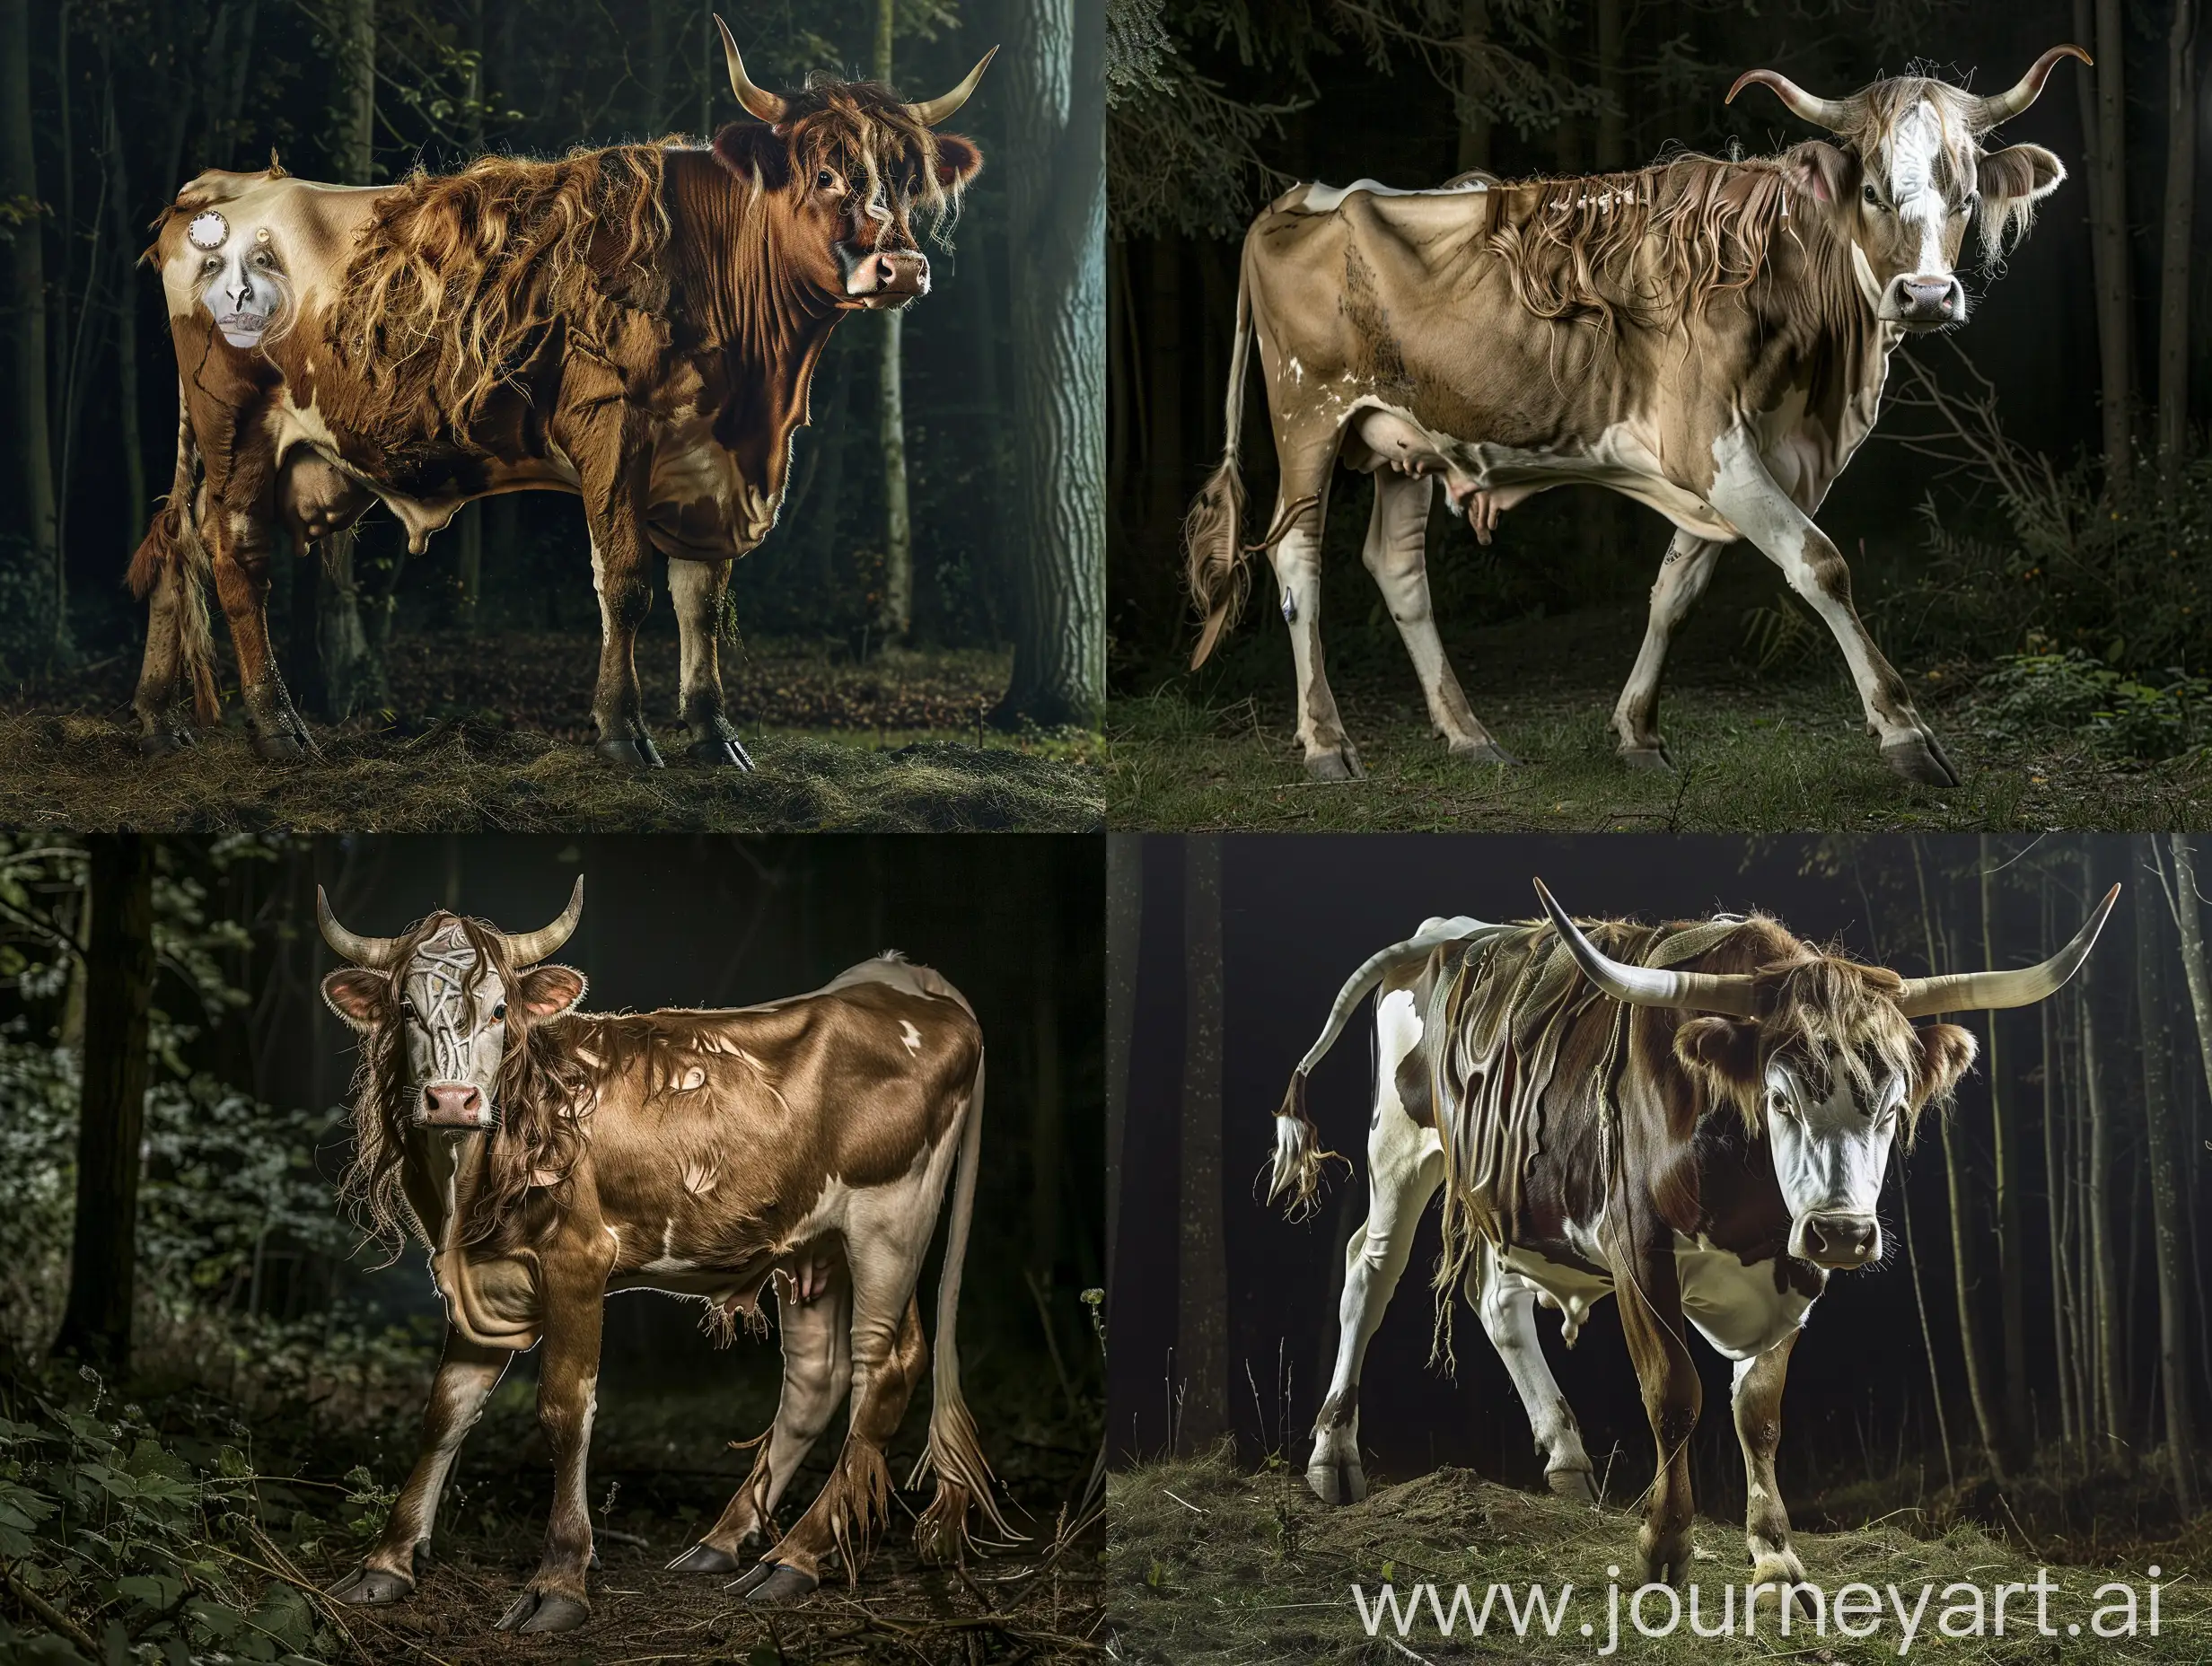 Enigmatic-Night-Surreal-Cow-with-Human-Face-in-Forest